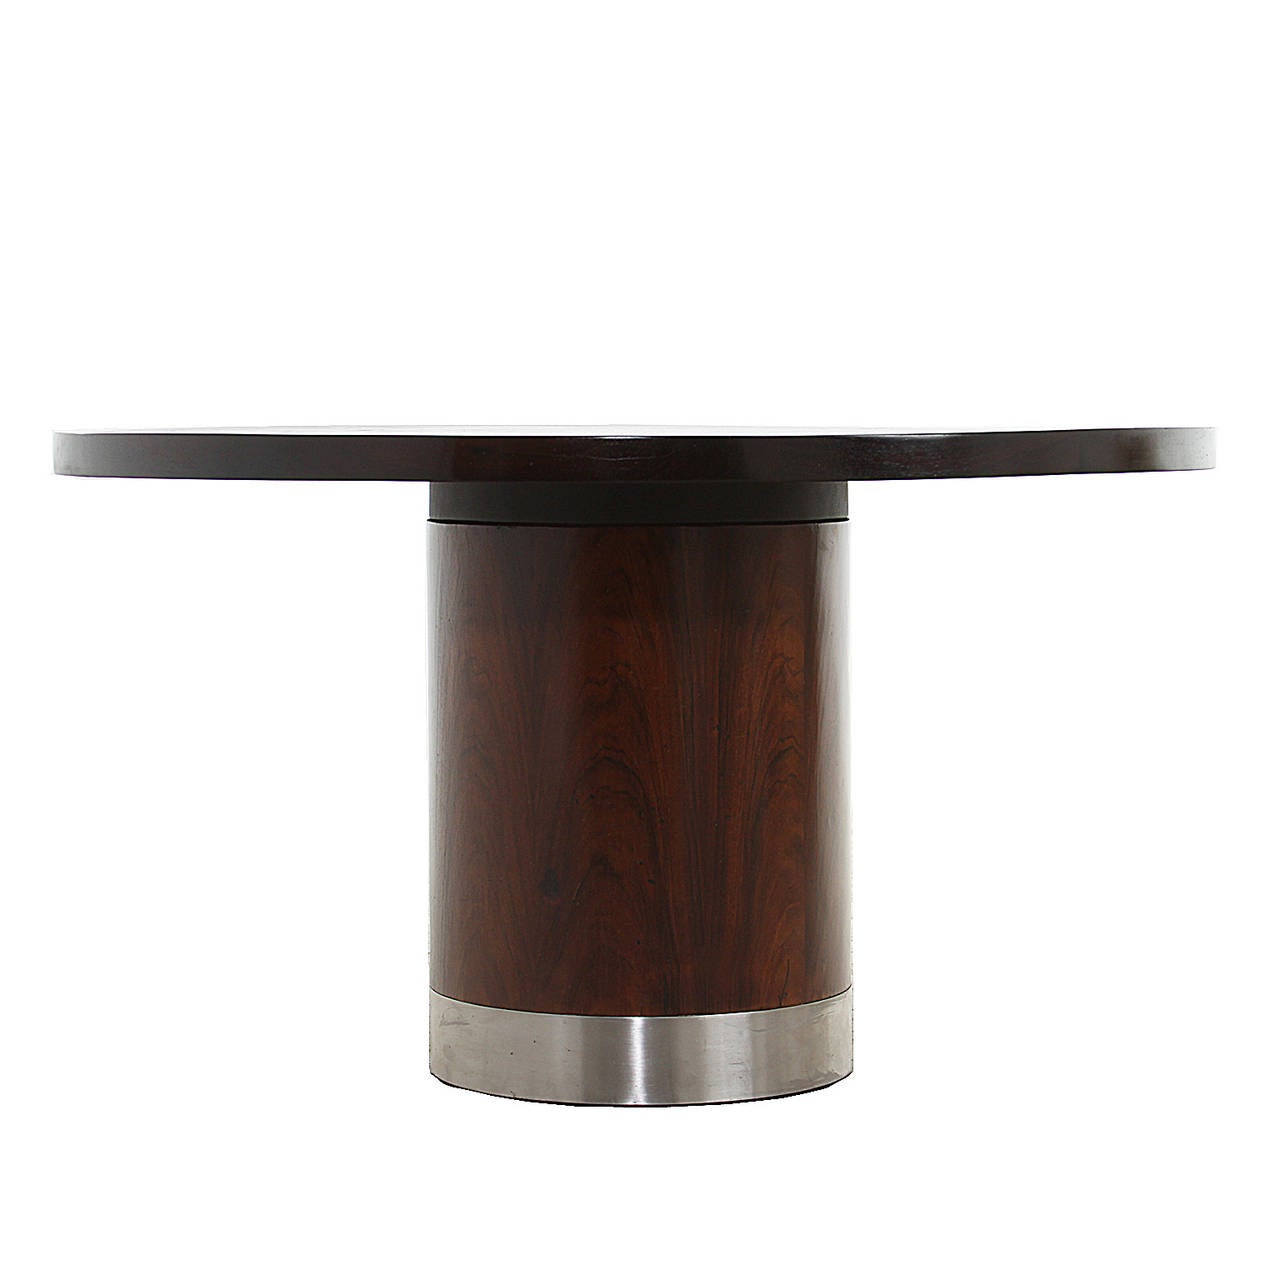 A beautiful exotic hardwood dining table by Brazilian designer Sergio Rodrigues. The base has a 4